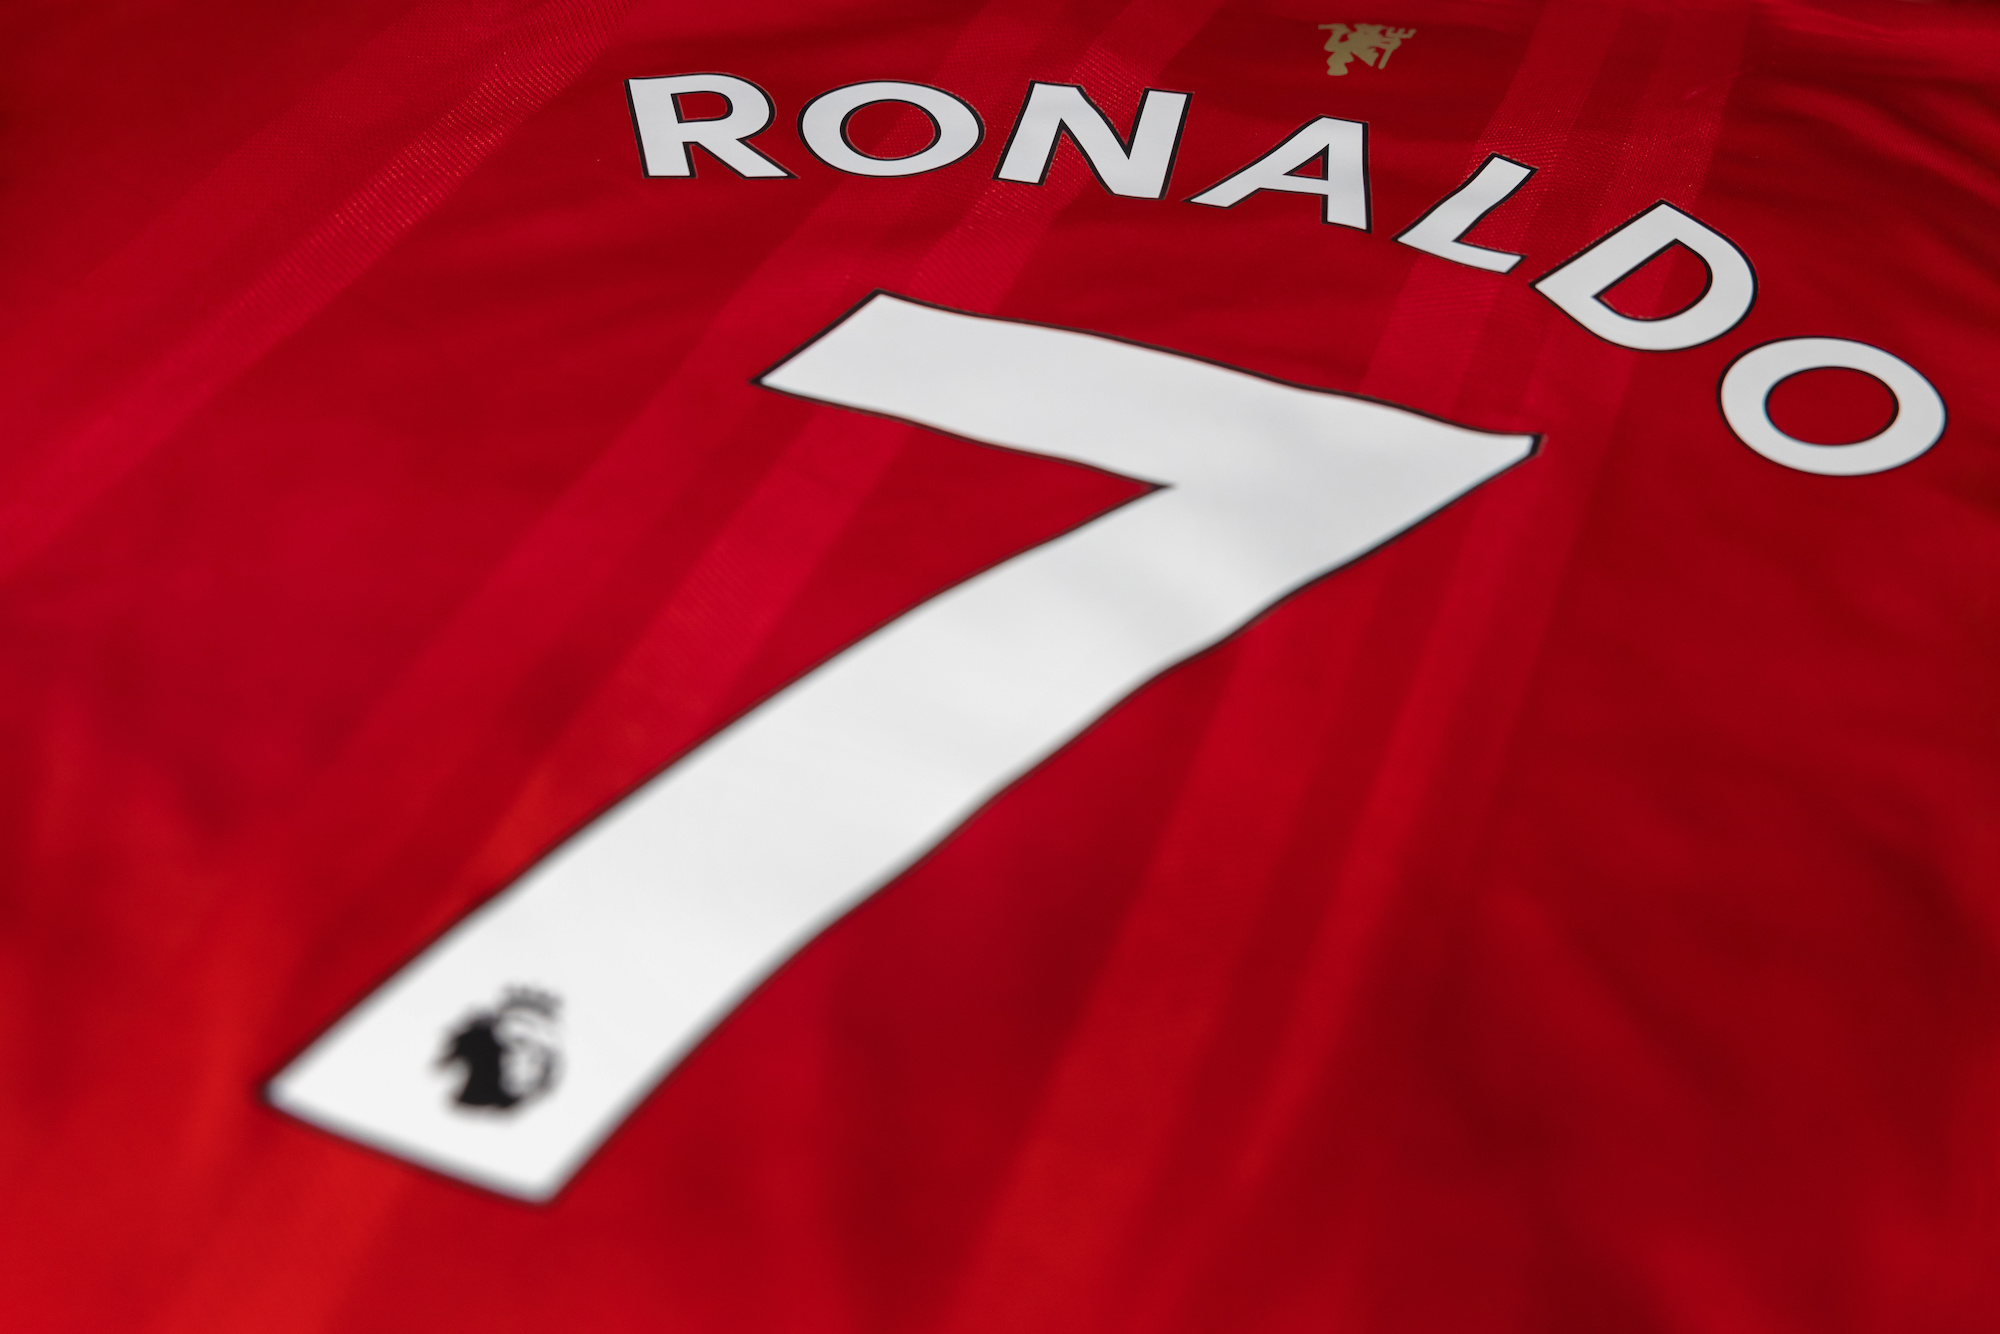 Cristiano Ronaldo Name on Manchester United Red Jersey For His Returned to English Premier League